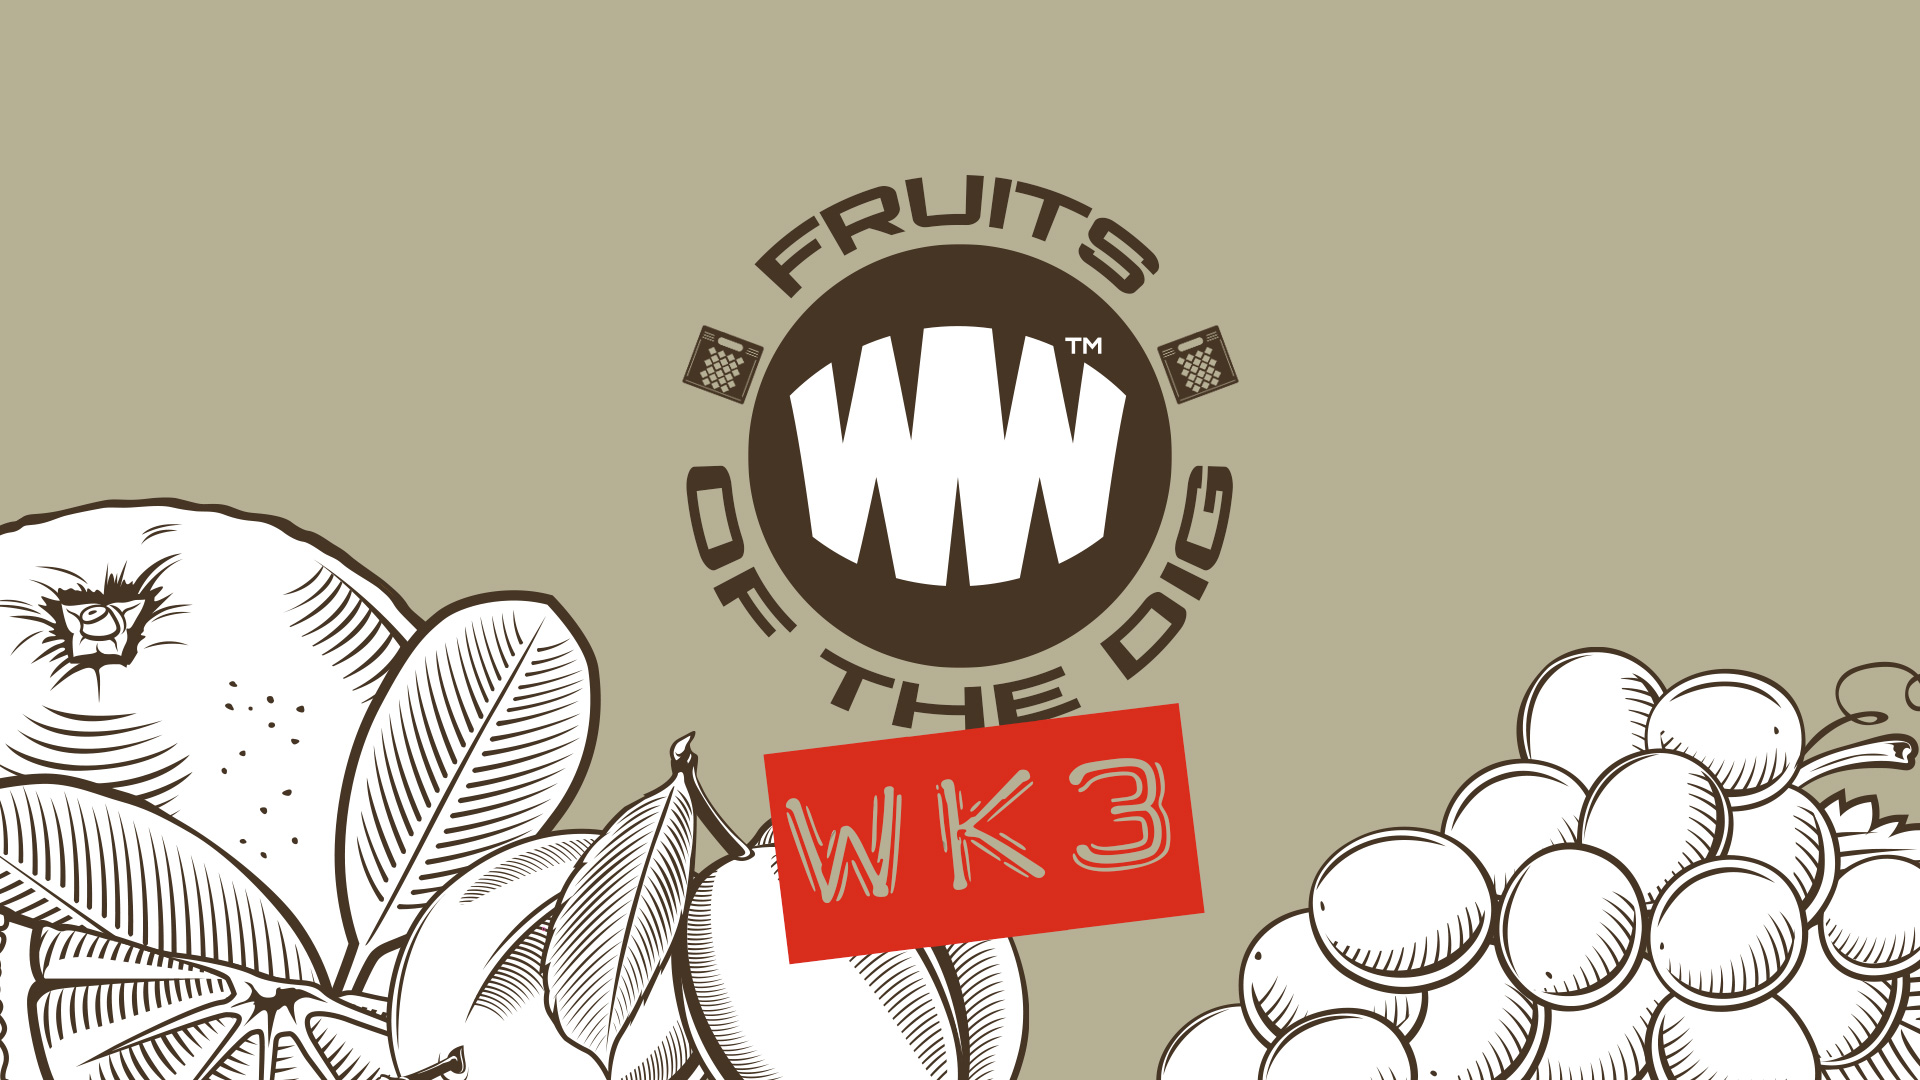 Fruits of the dig - Wk 3